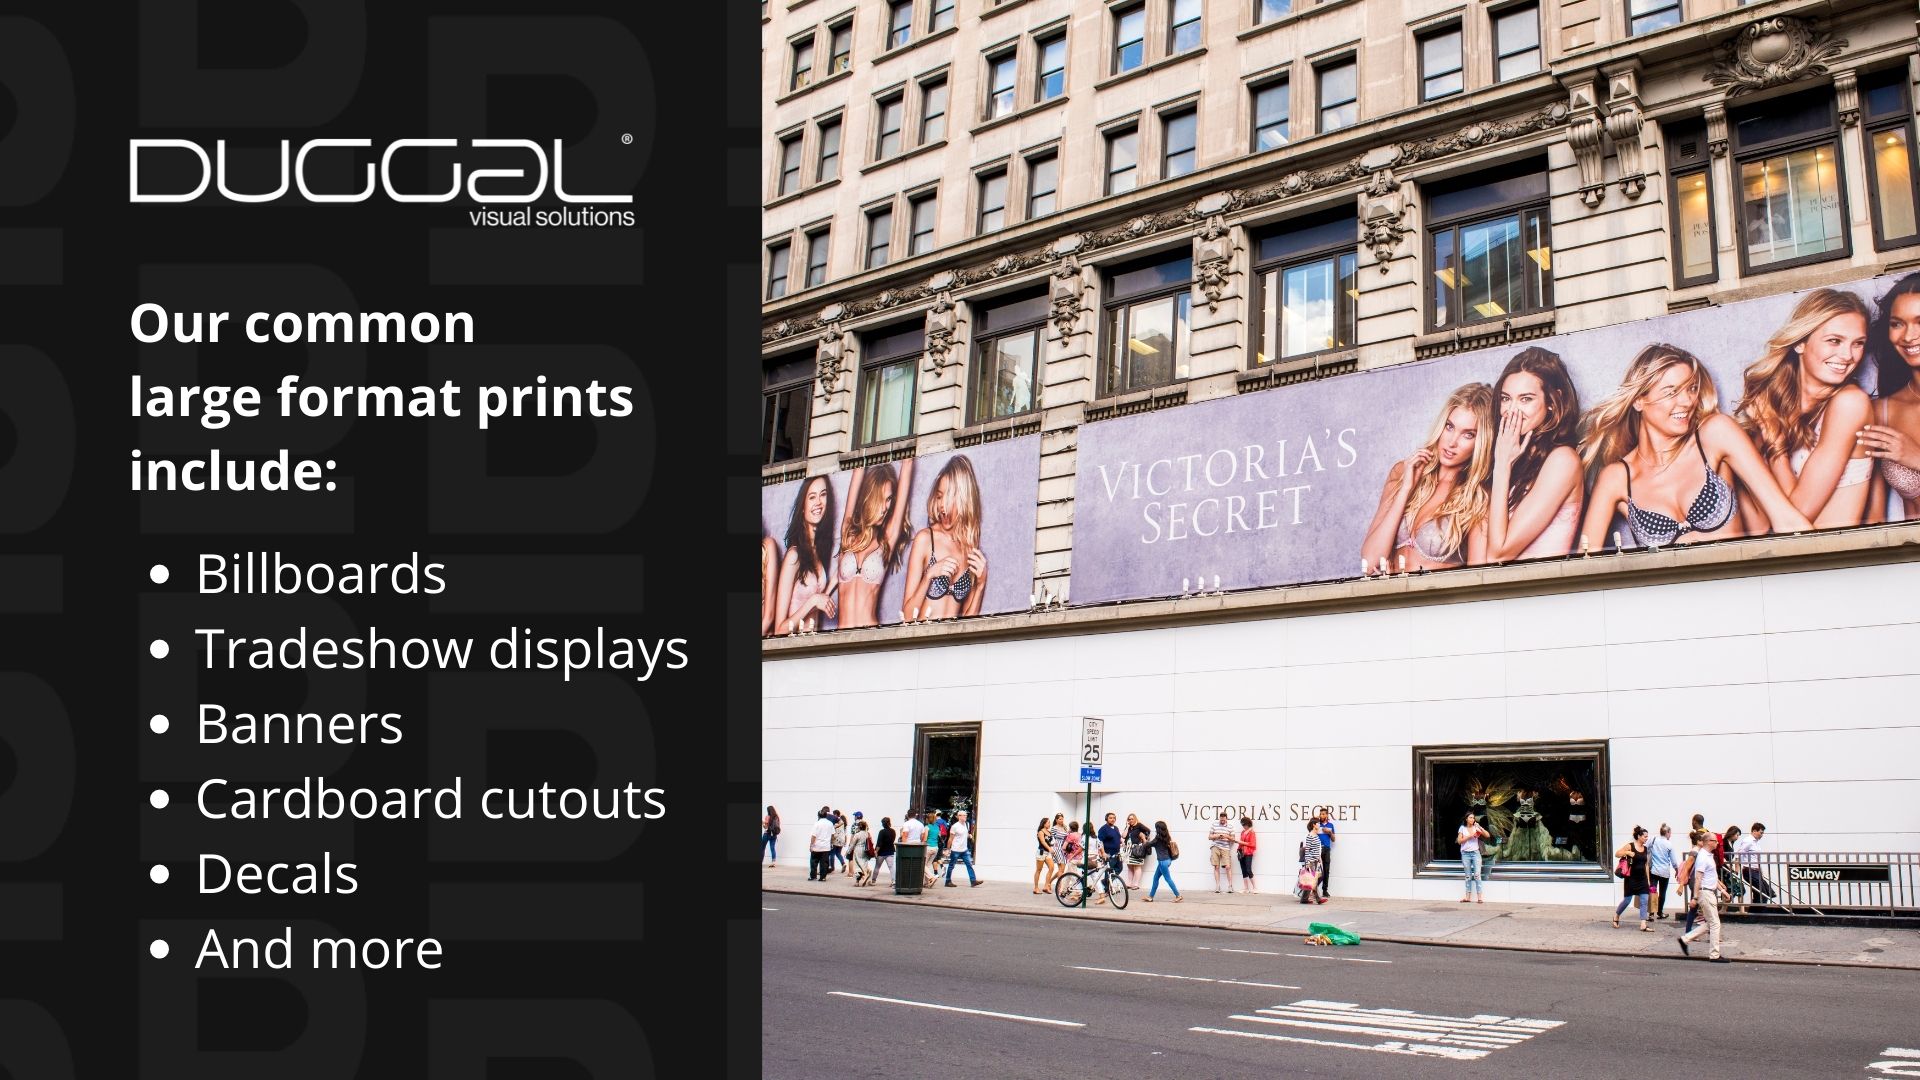 Photo of a billboard with text on the left explaining Duggal's common large format projects